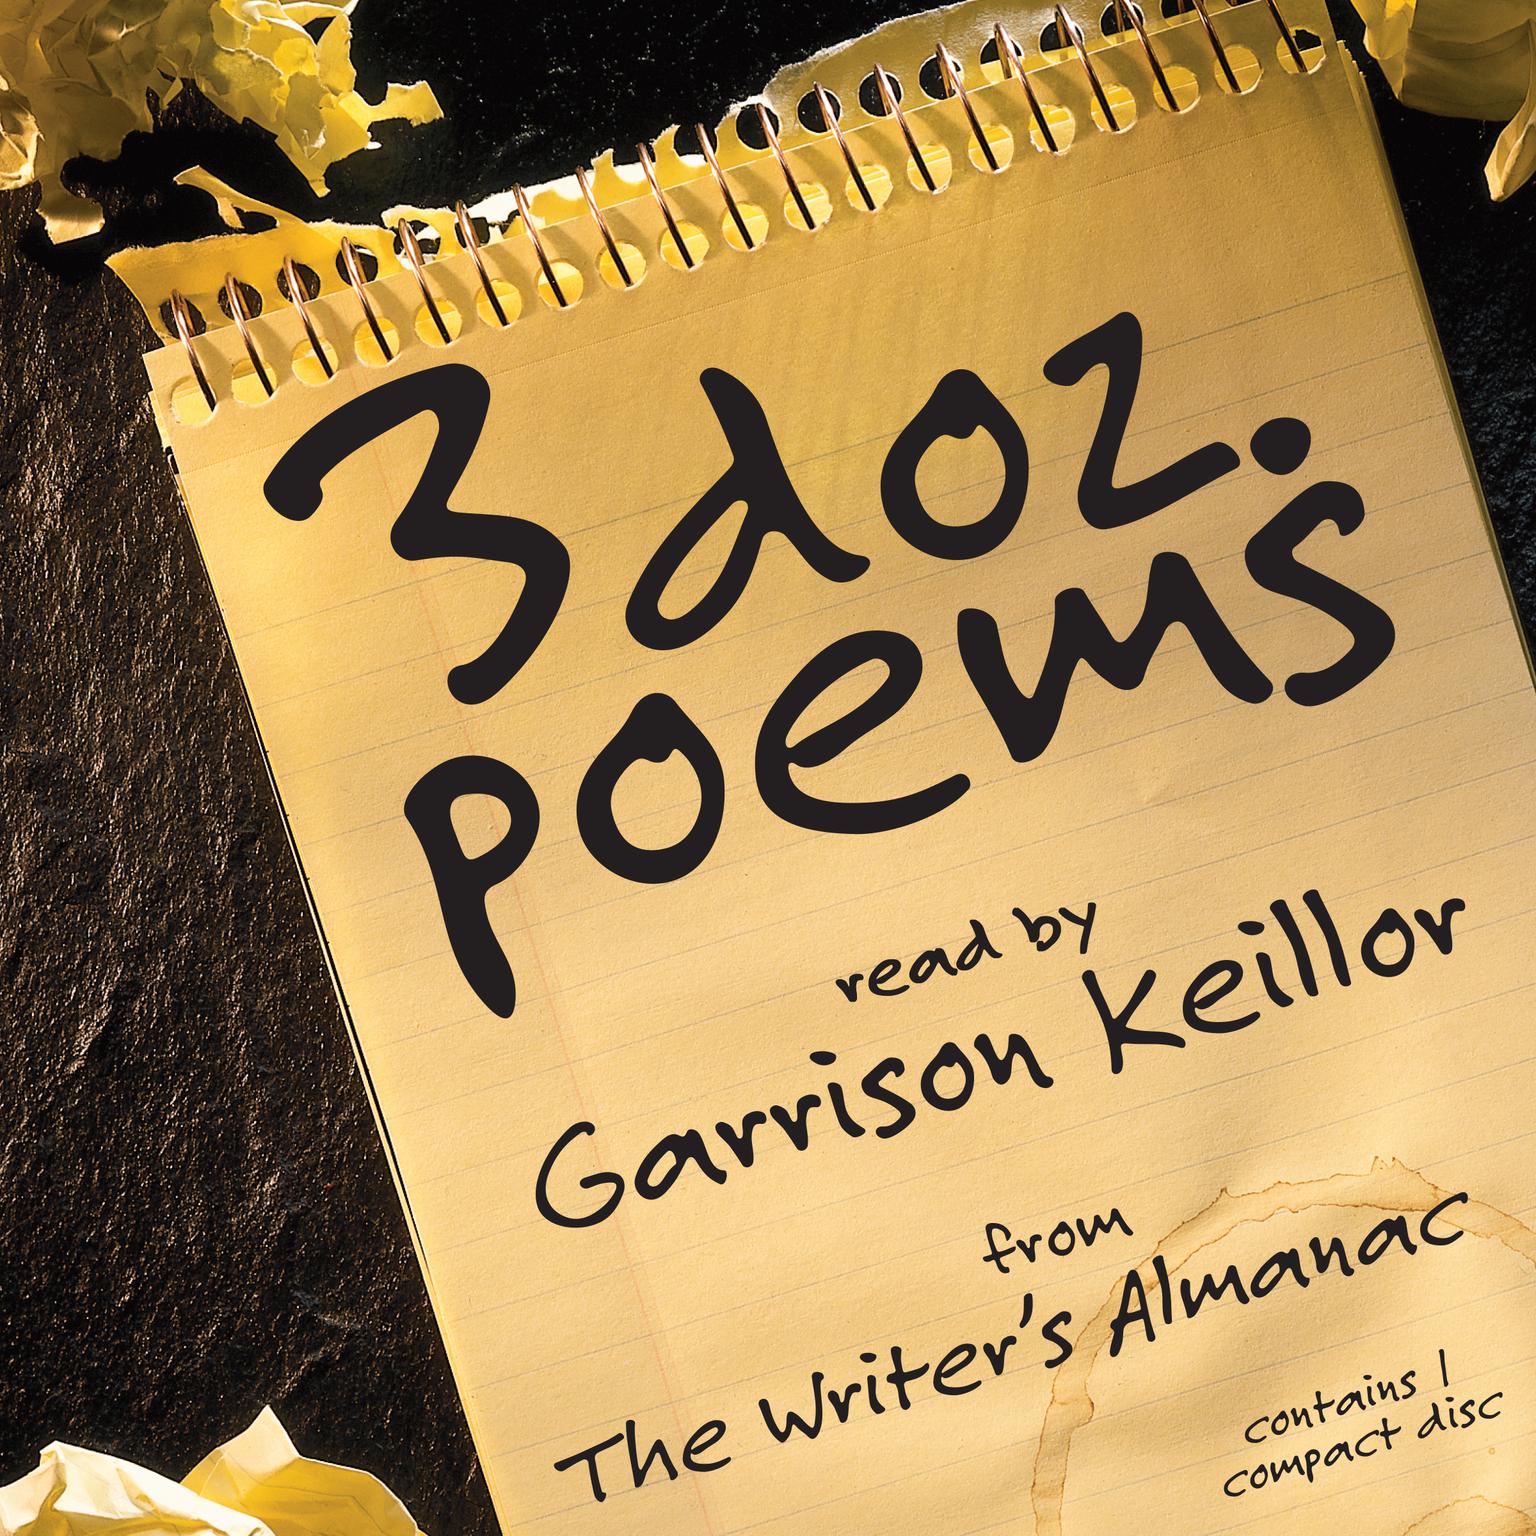 3 Dozen Poems: From the Writers Almanac Audiobook, by various authors